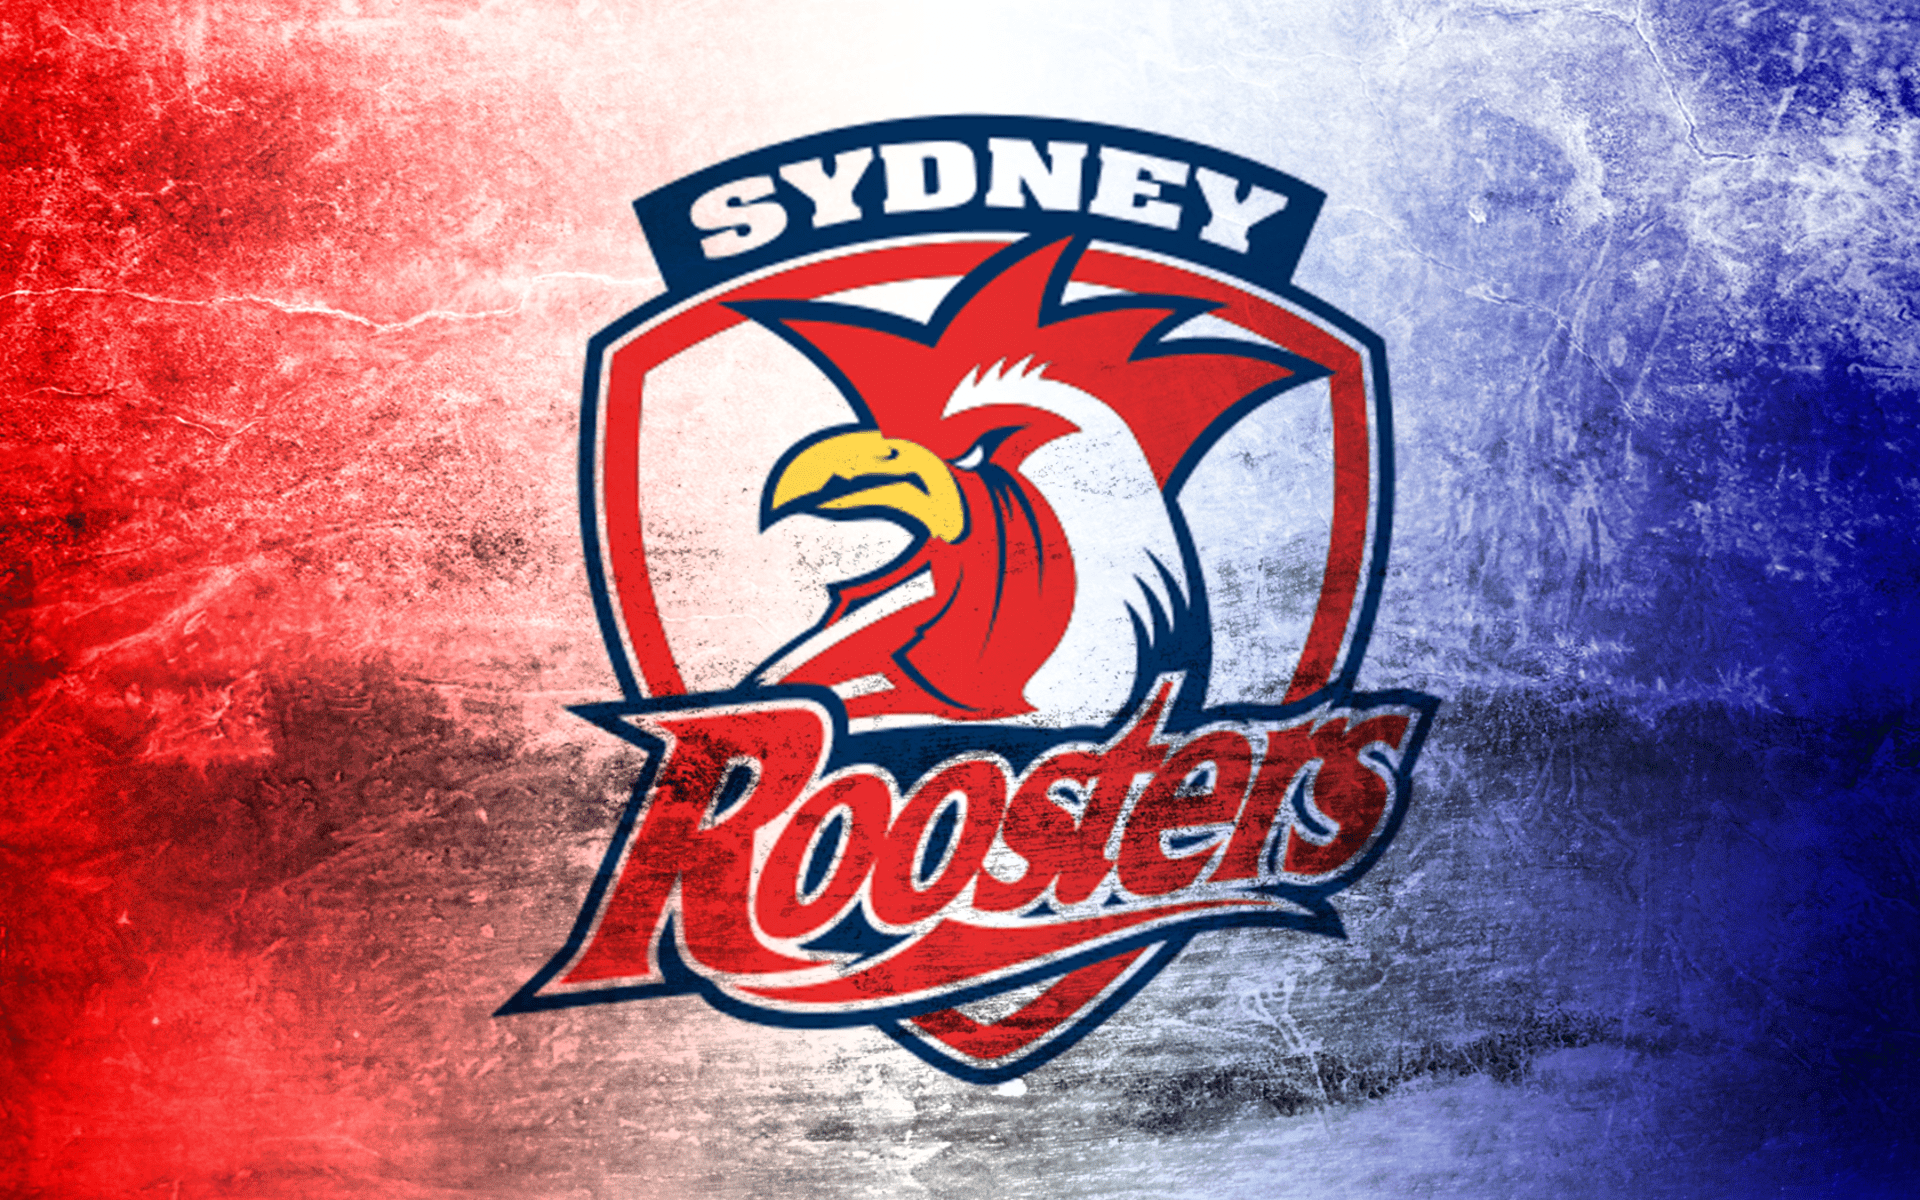 Sydney Roosters Wallpapers Top Free Sydney Roosters Backgrounds